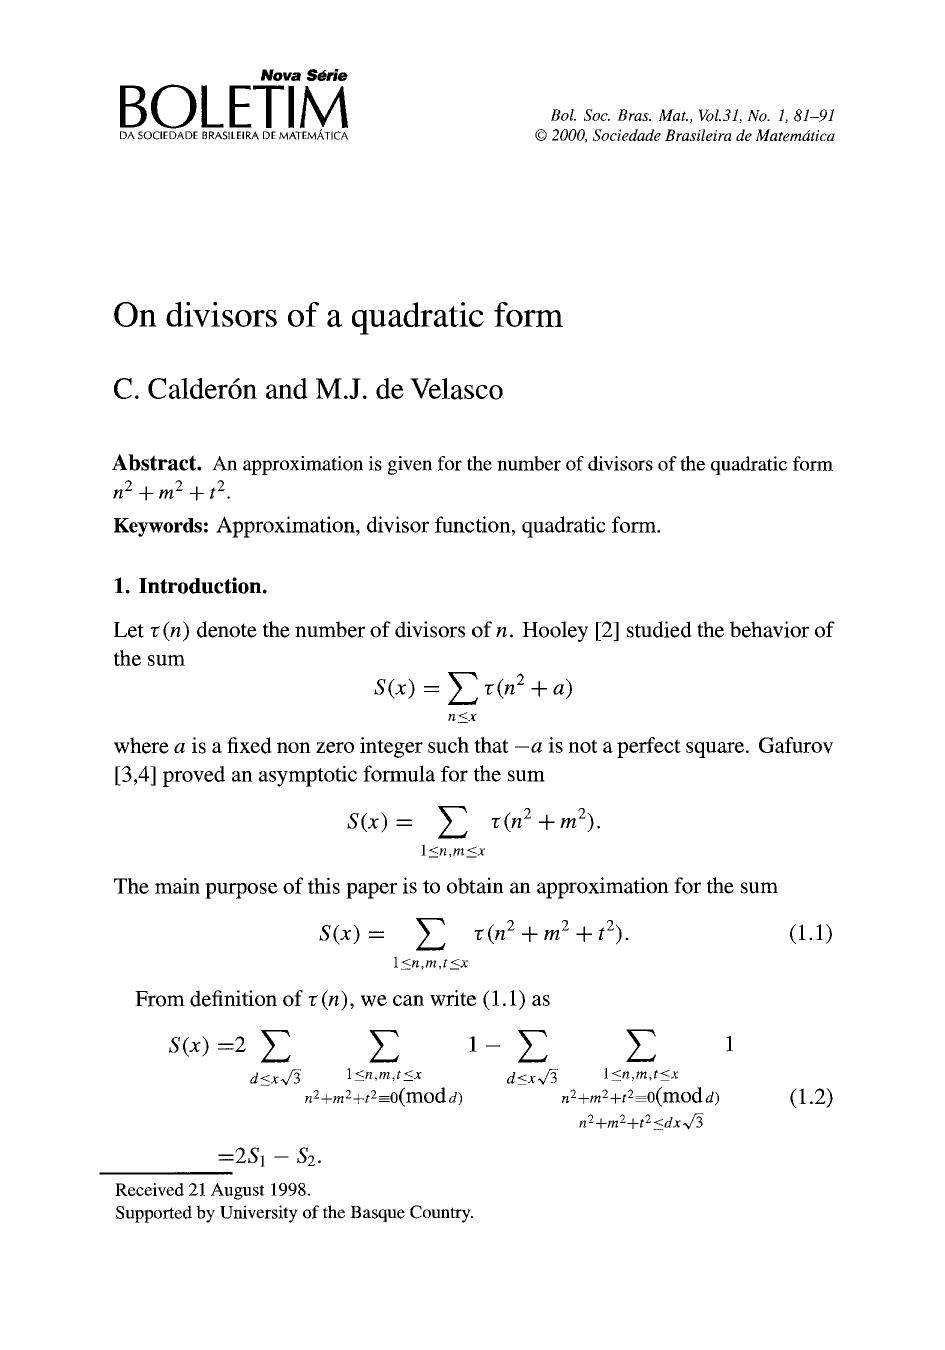 On divisors of a quadratic form by Unknown